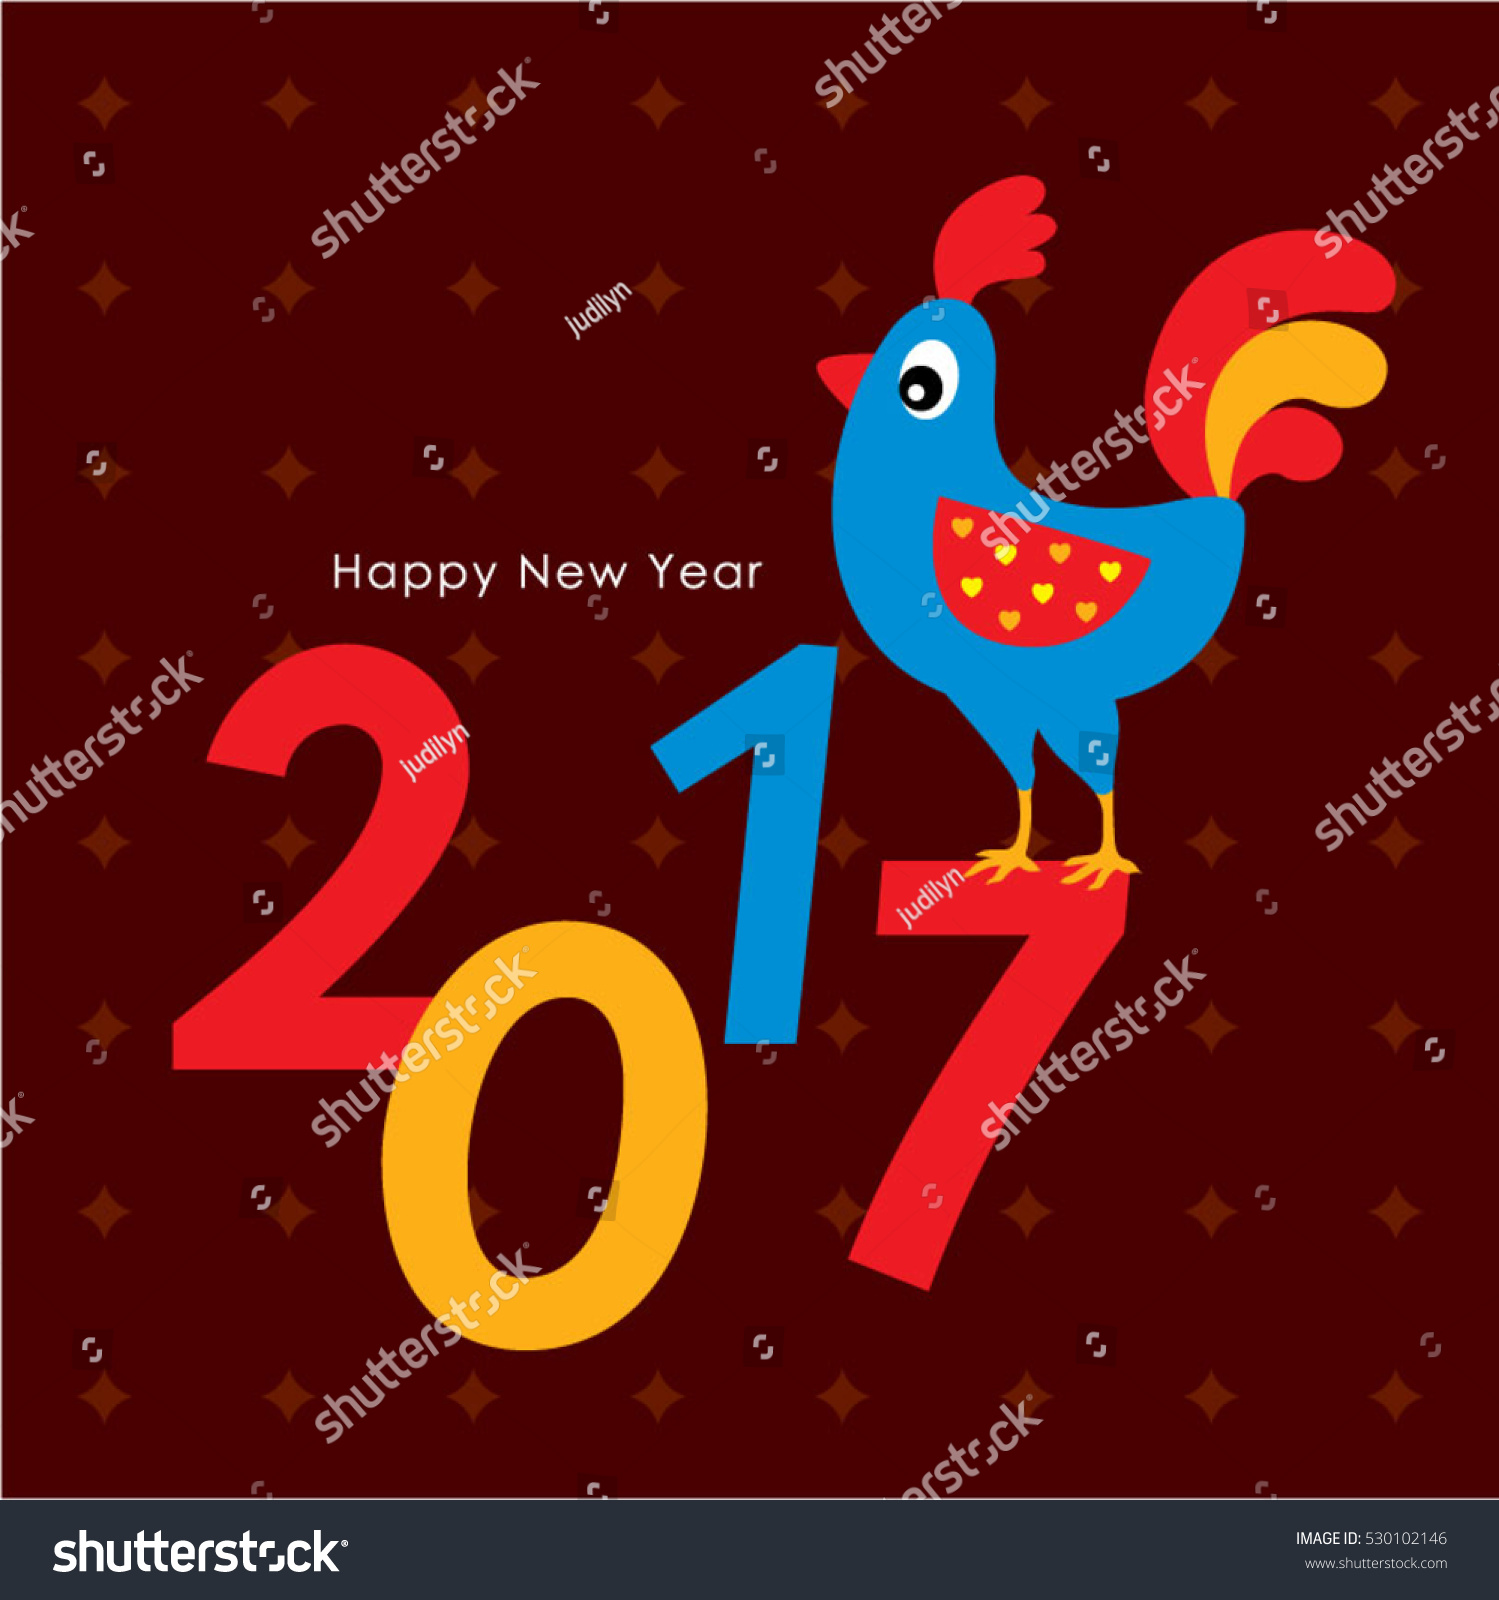 Cute Chicken Happy New Year 2017 Greeting Vector ...